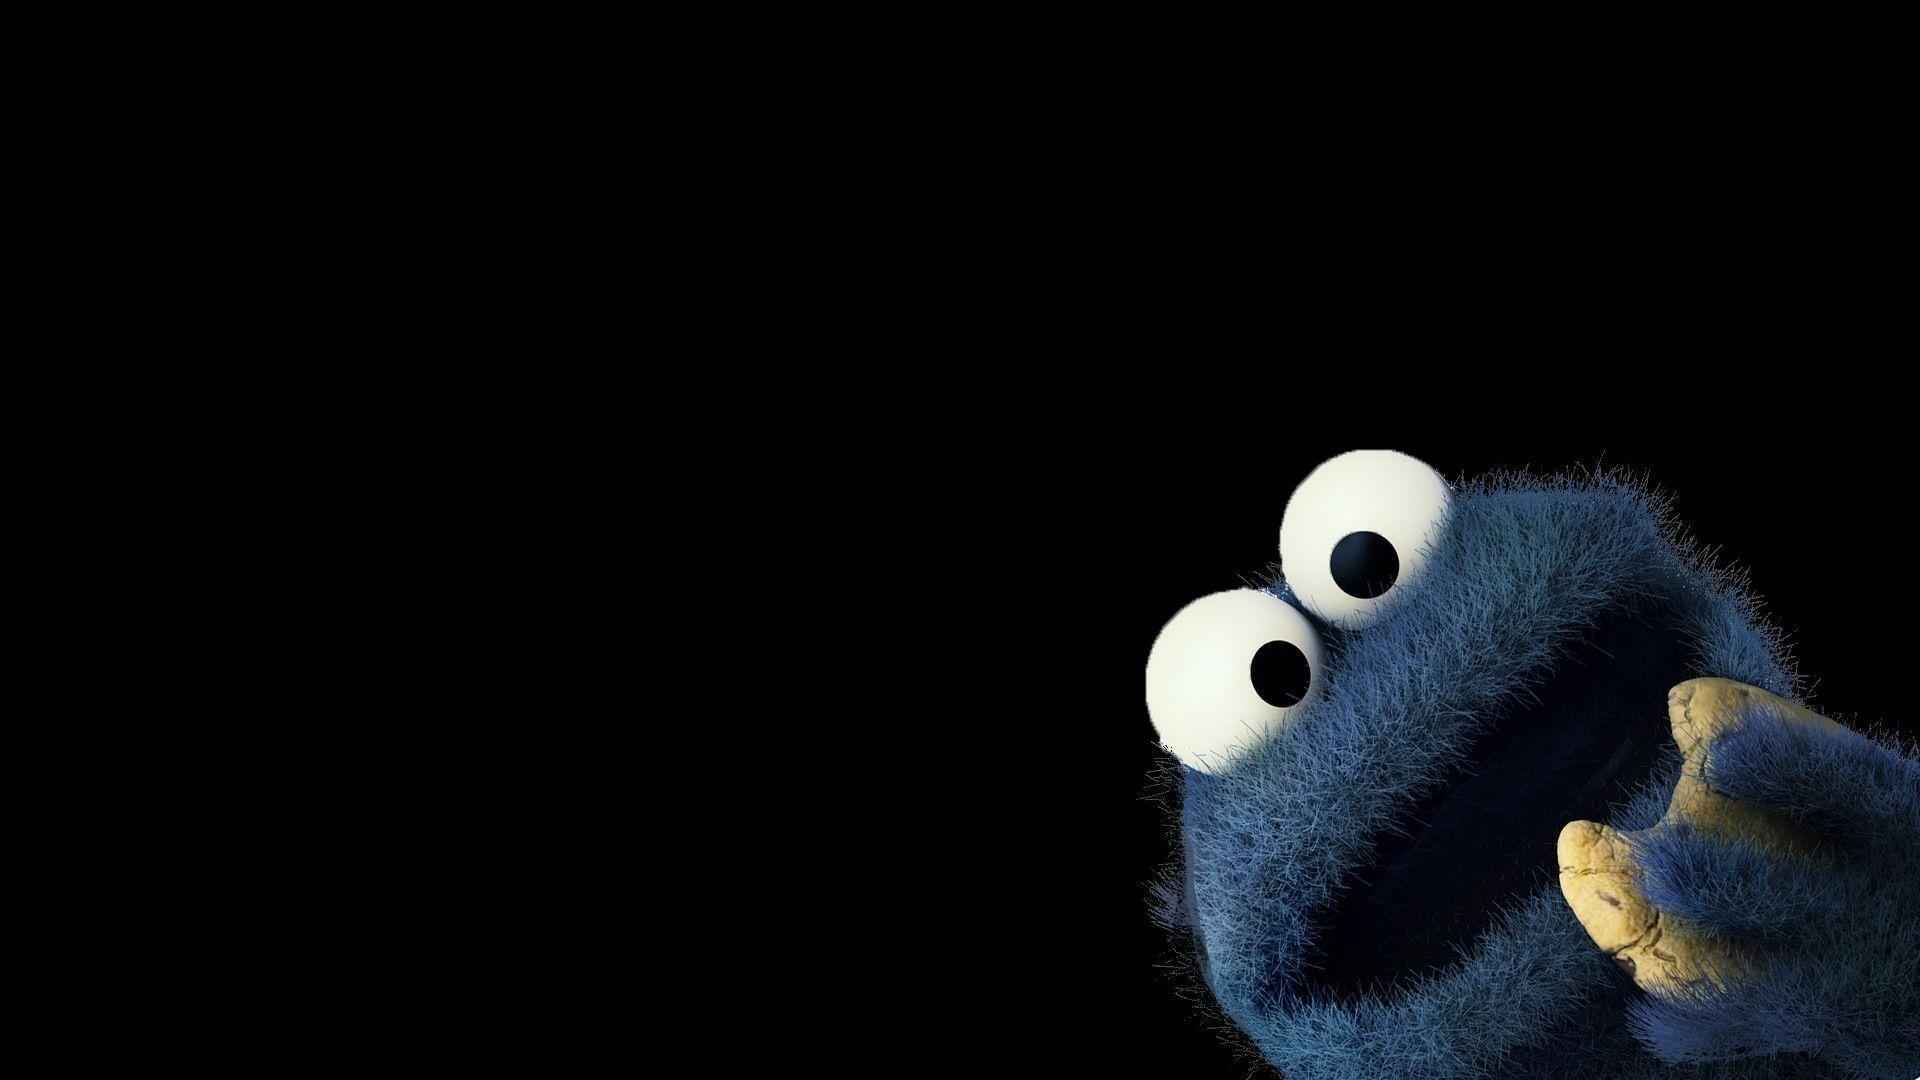 Cookie monster background I made ;D [1920x1080]